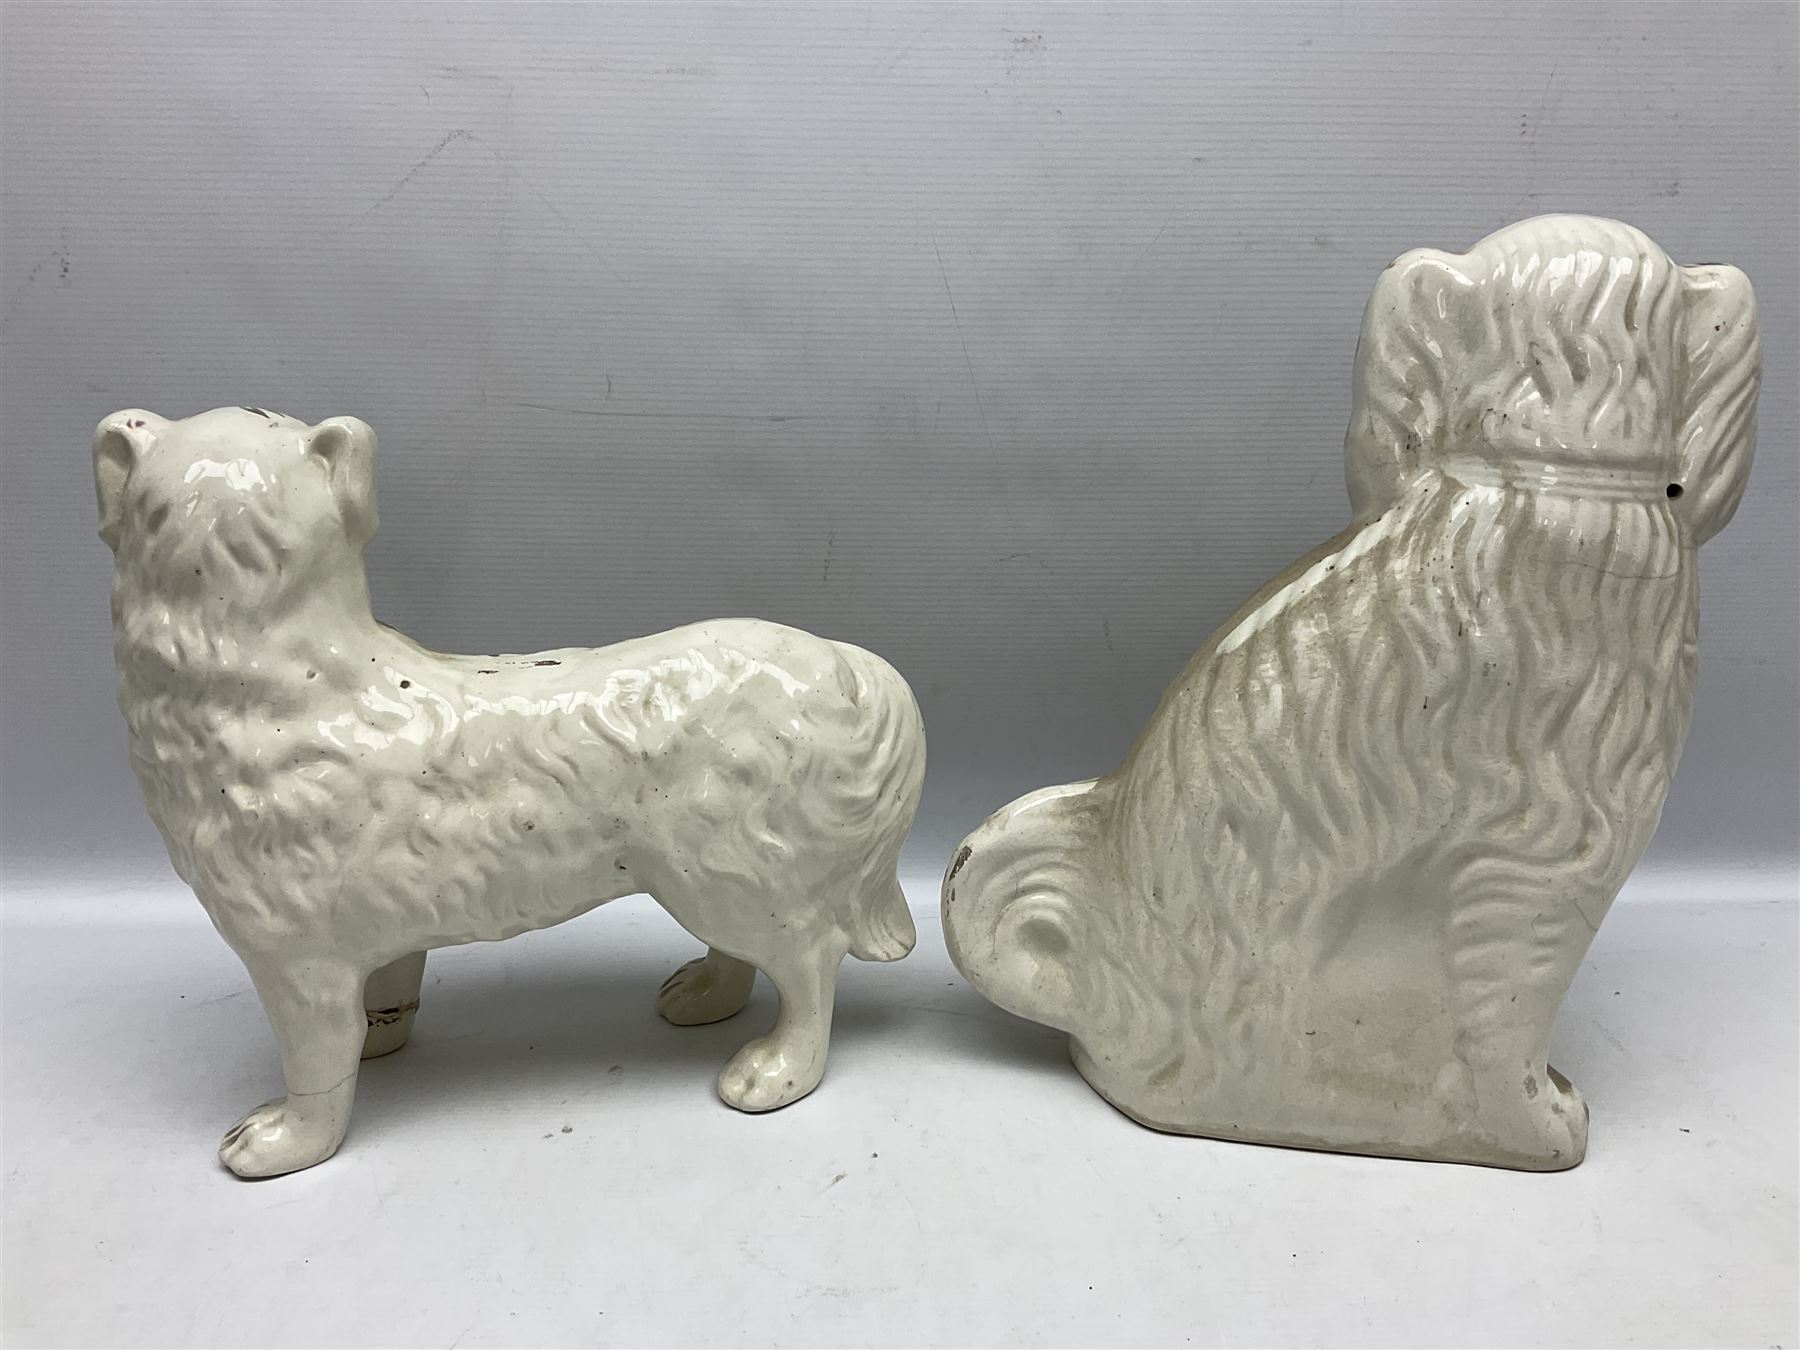 Pair of Staffordshire style dogs - Image 9 of 9